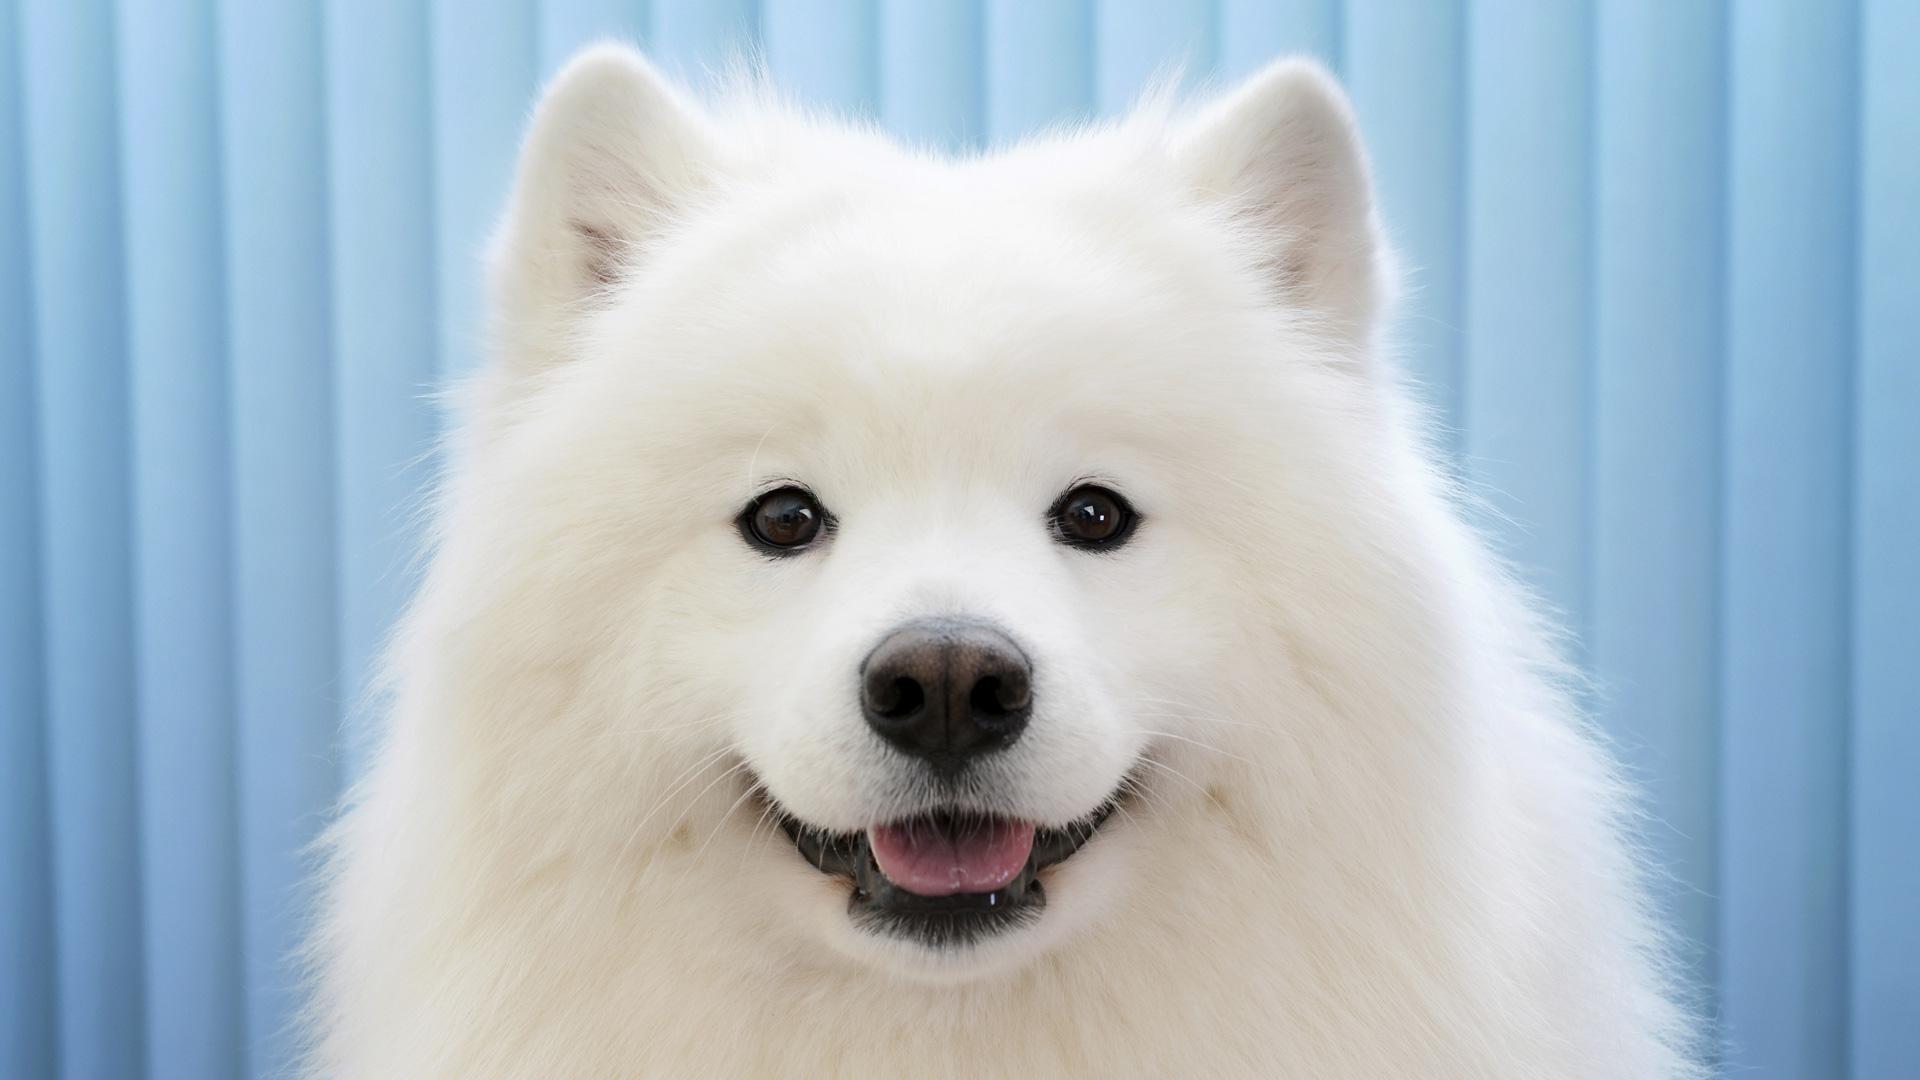 15 Adorable dogs that look like they're smiling